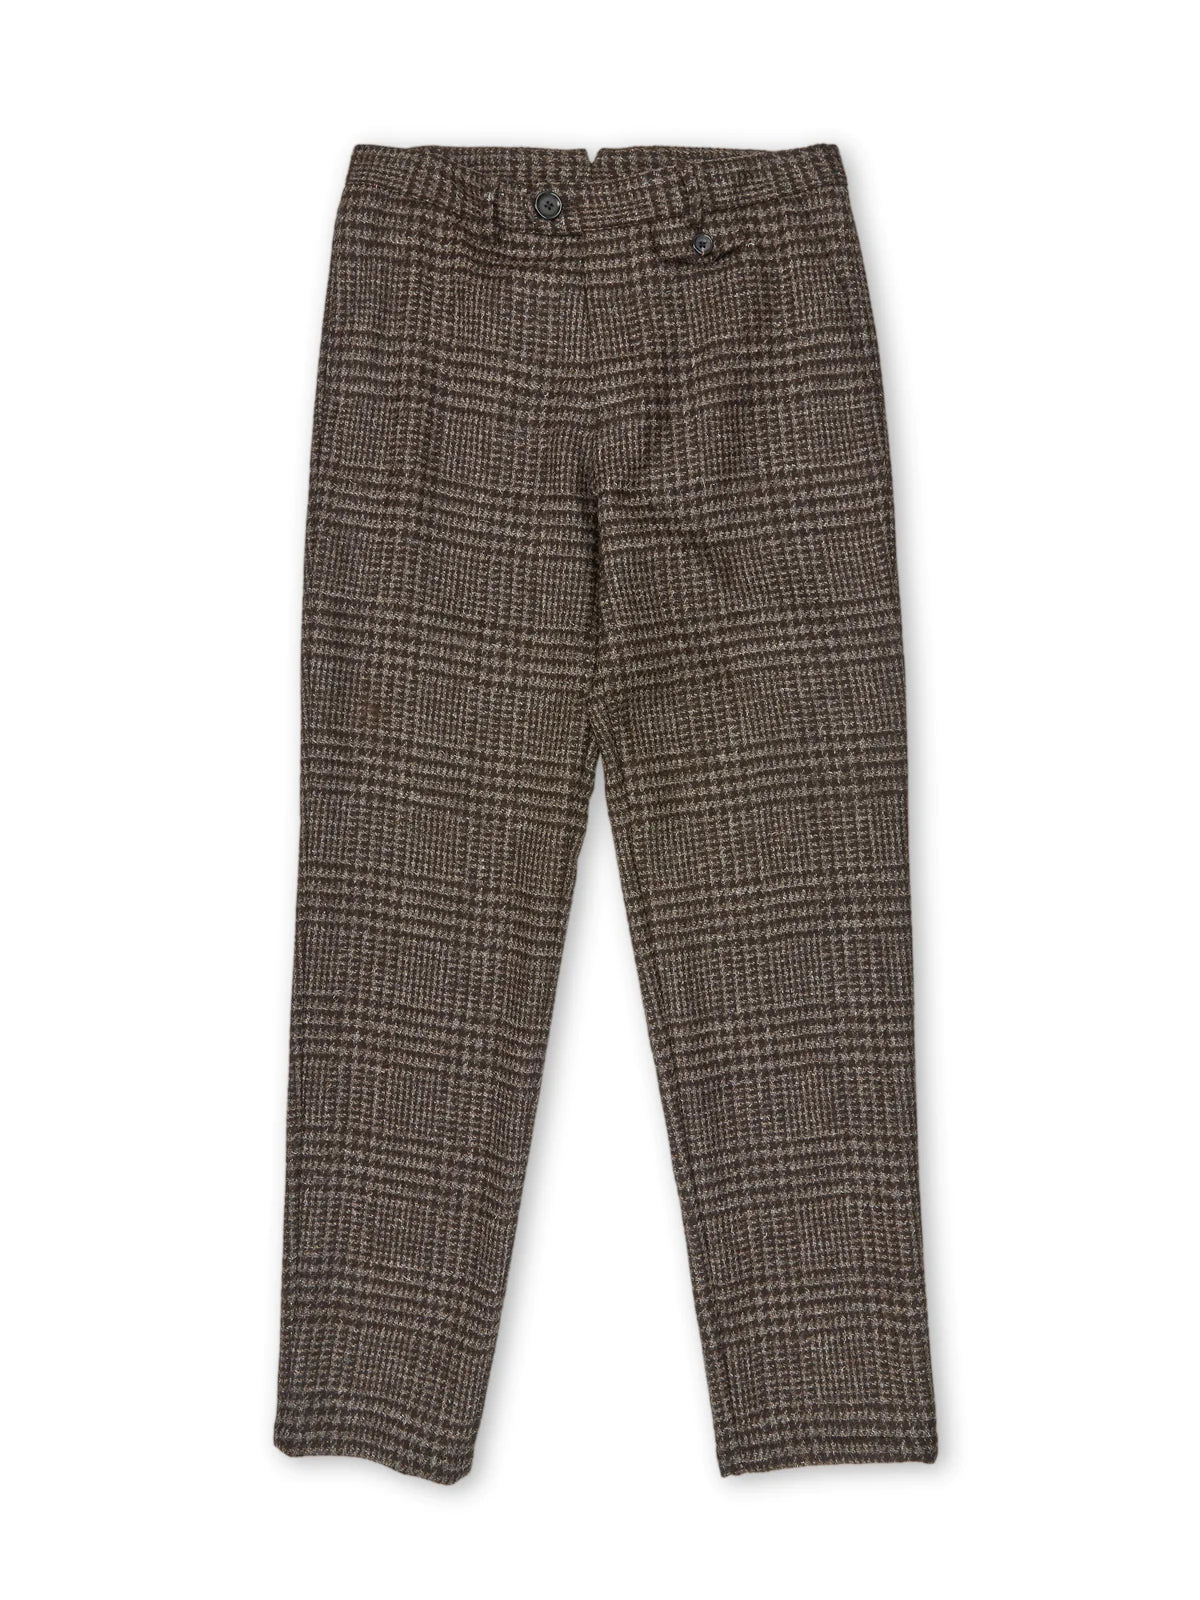 Fishtail Trousers Pants Oliver Spencer Brown 30 